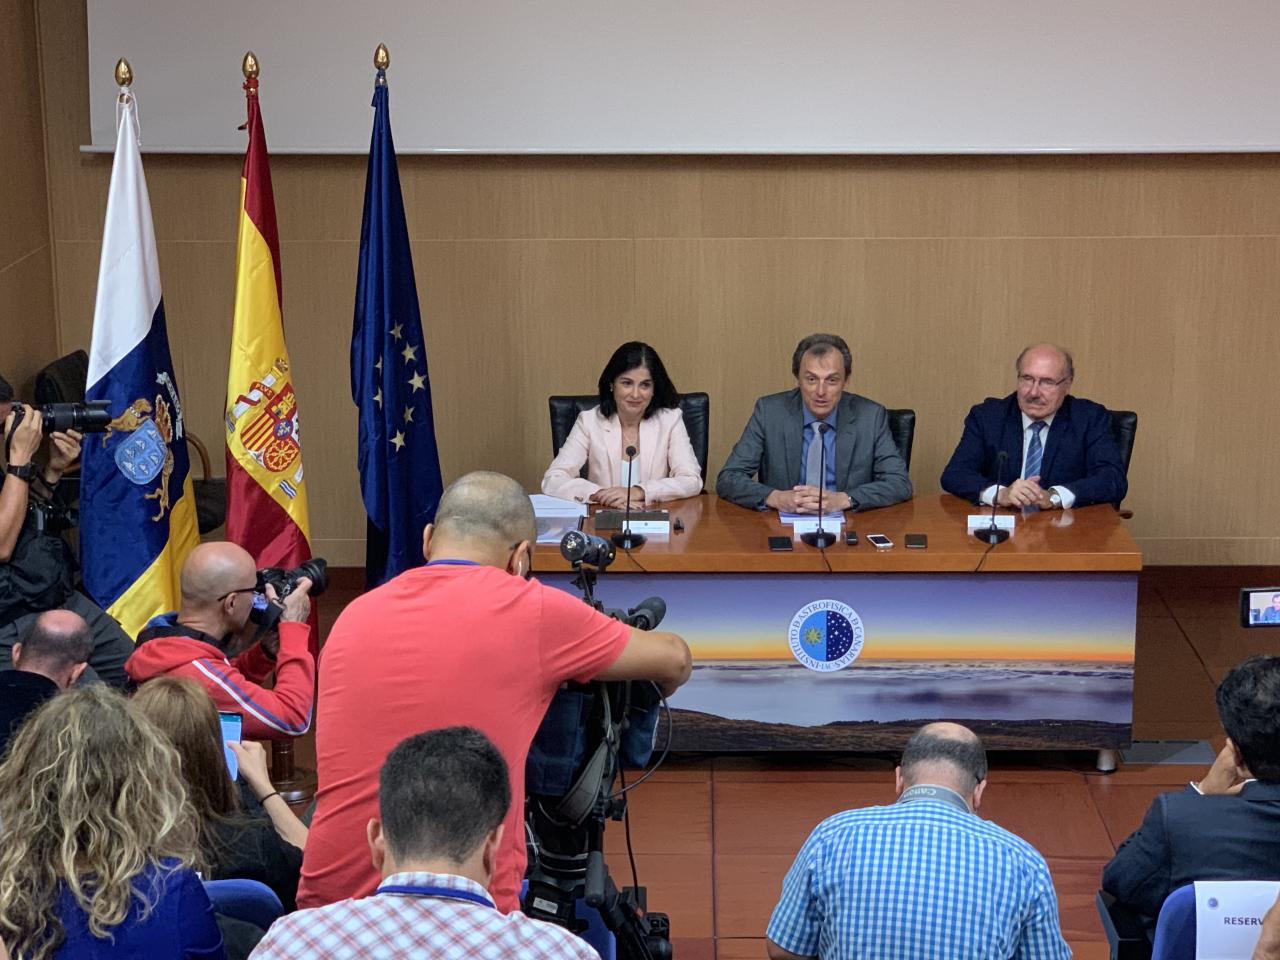 Press conference after the meeting of the Governing Council